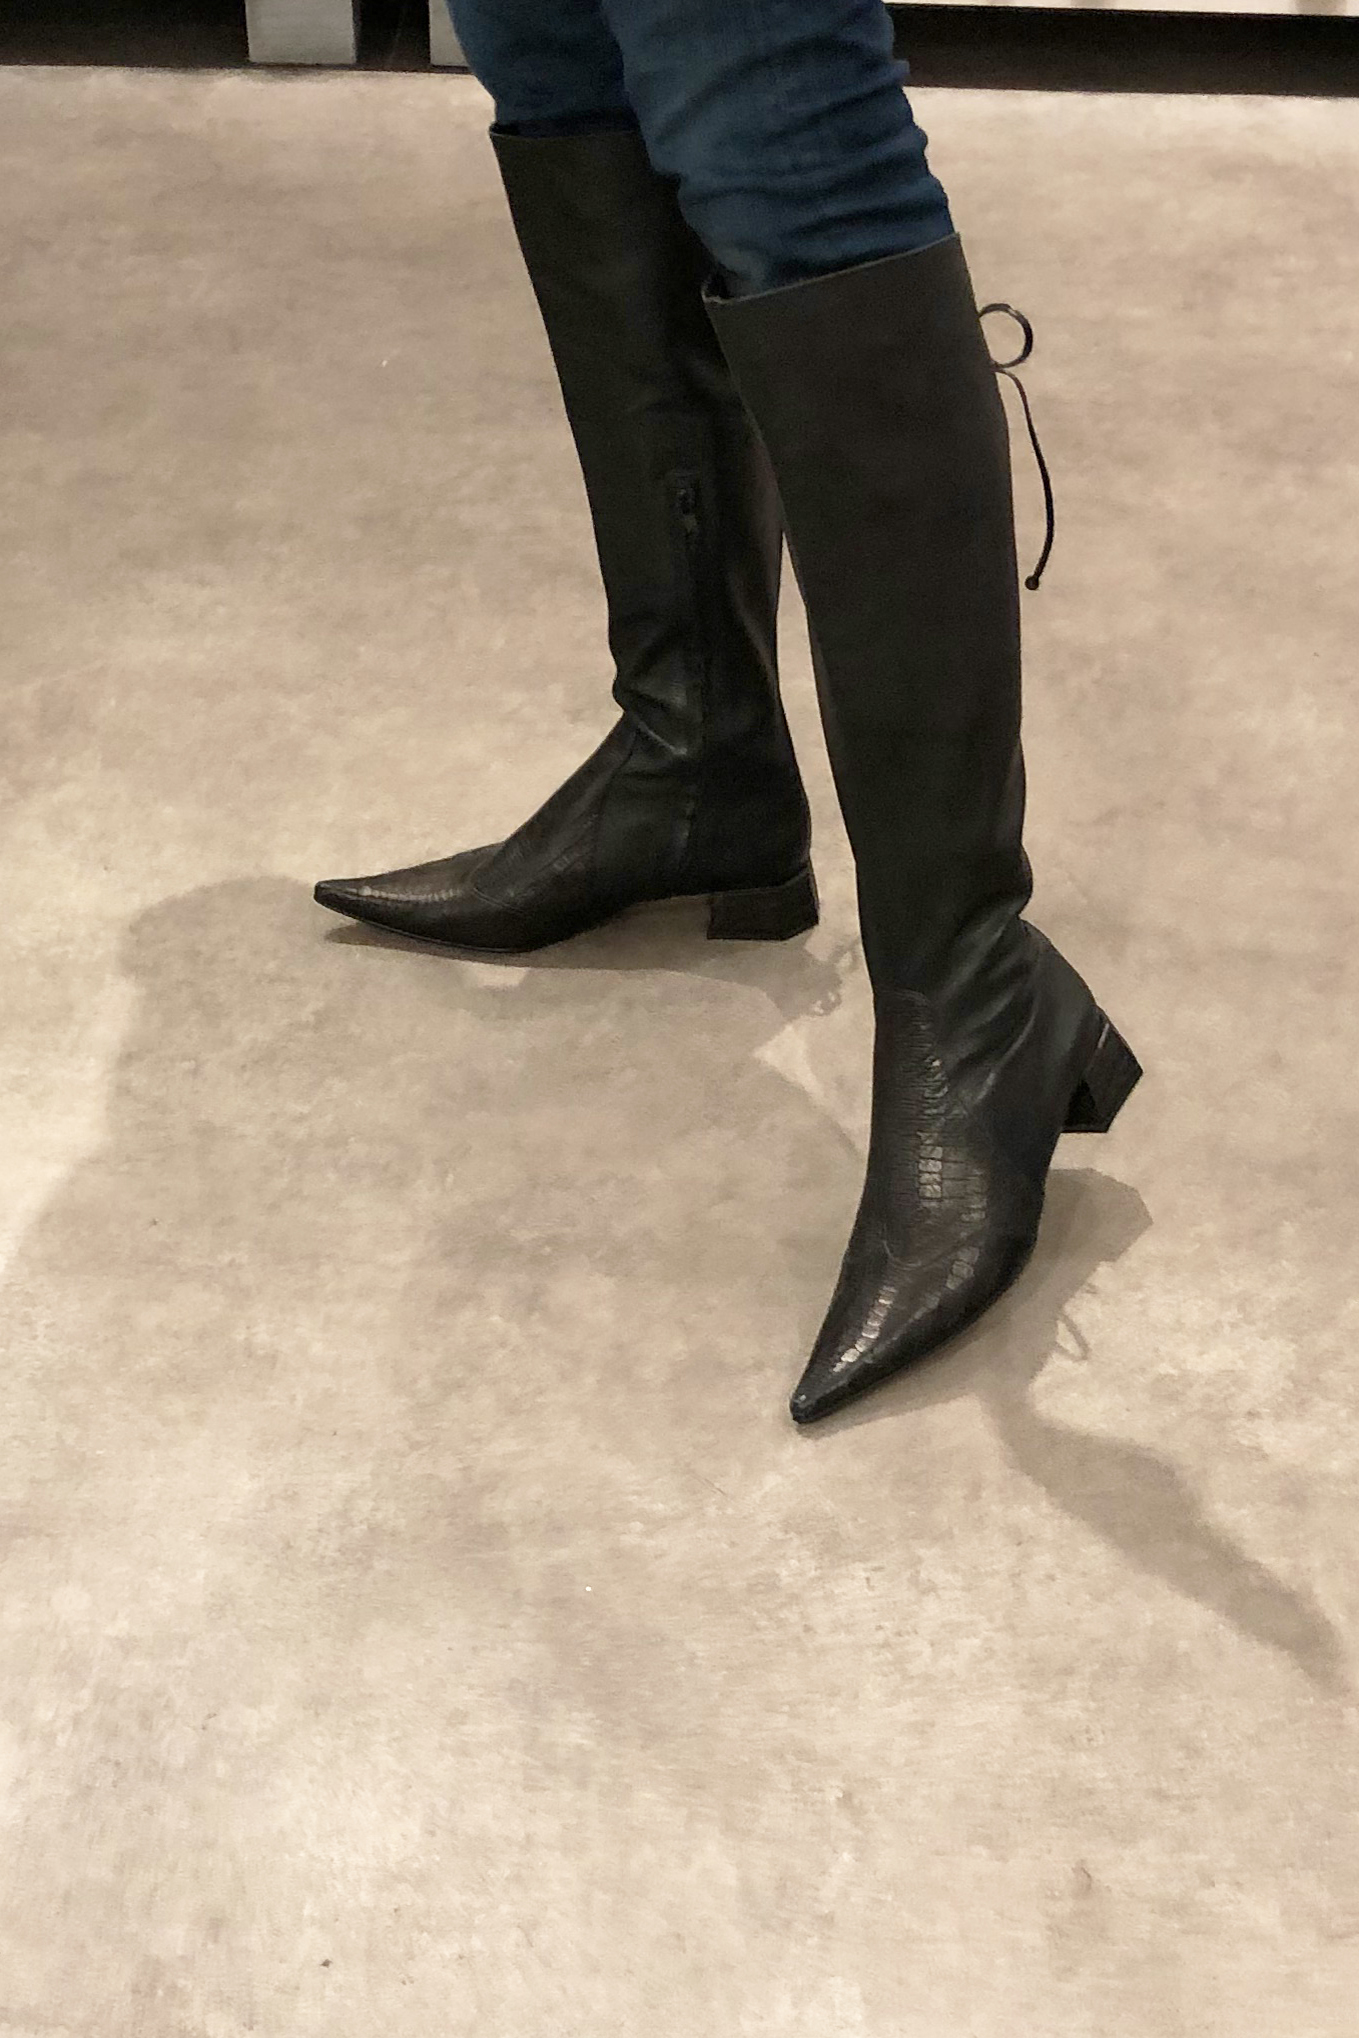 Satin black women's knee-high boots, with laces at the back. Pointed toe. Low flare heels. Made to measure. Worn view - Florence KOOIJMAN